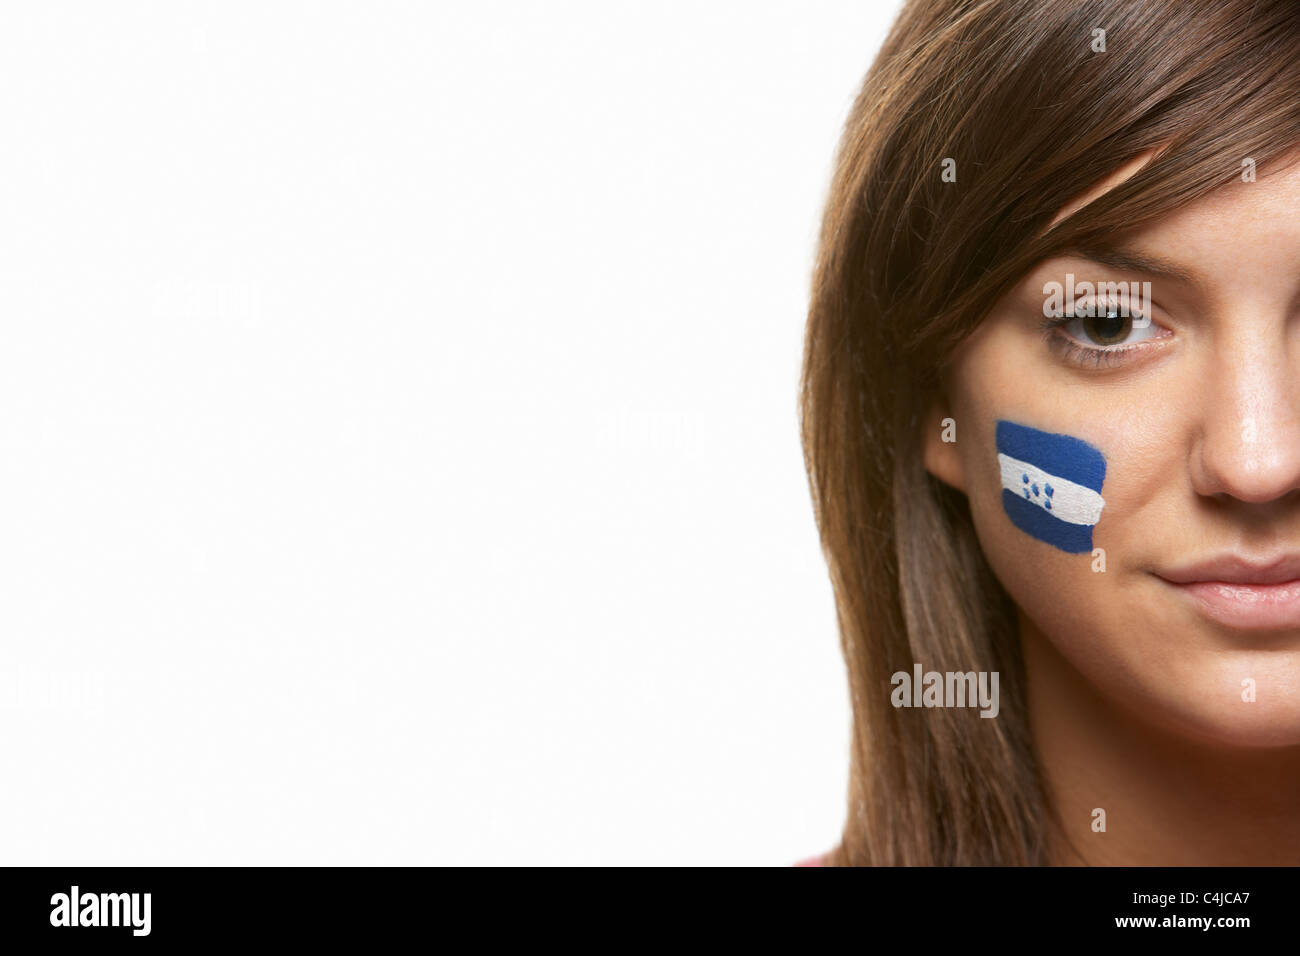 Young Female Sports Fan With Honduras Flag Painted On Face Stock Photo